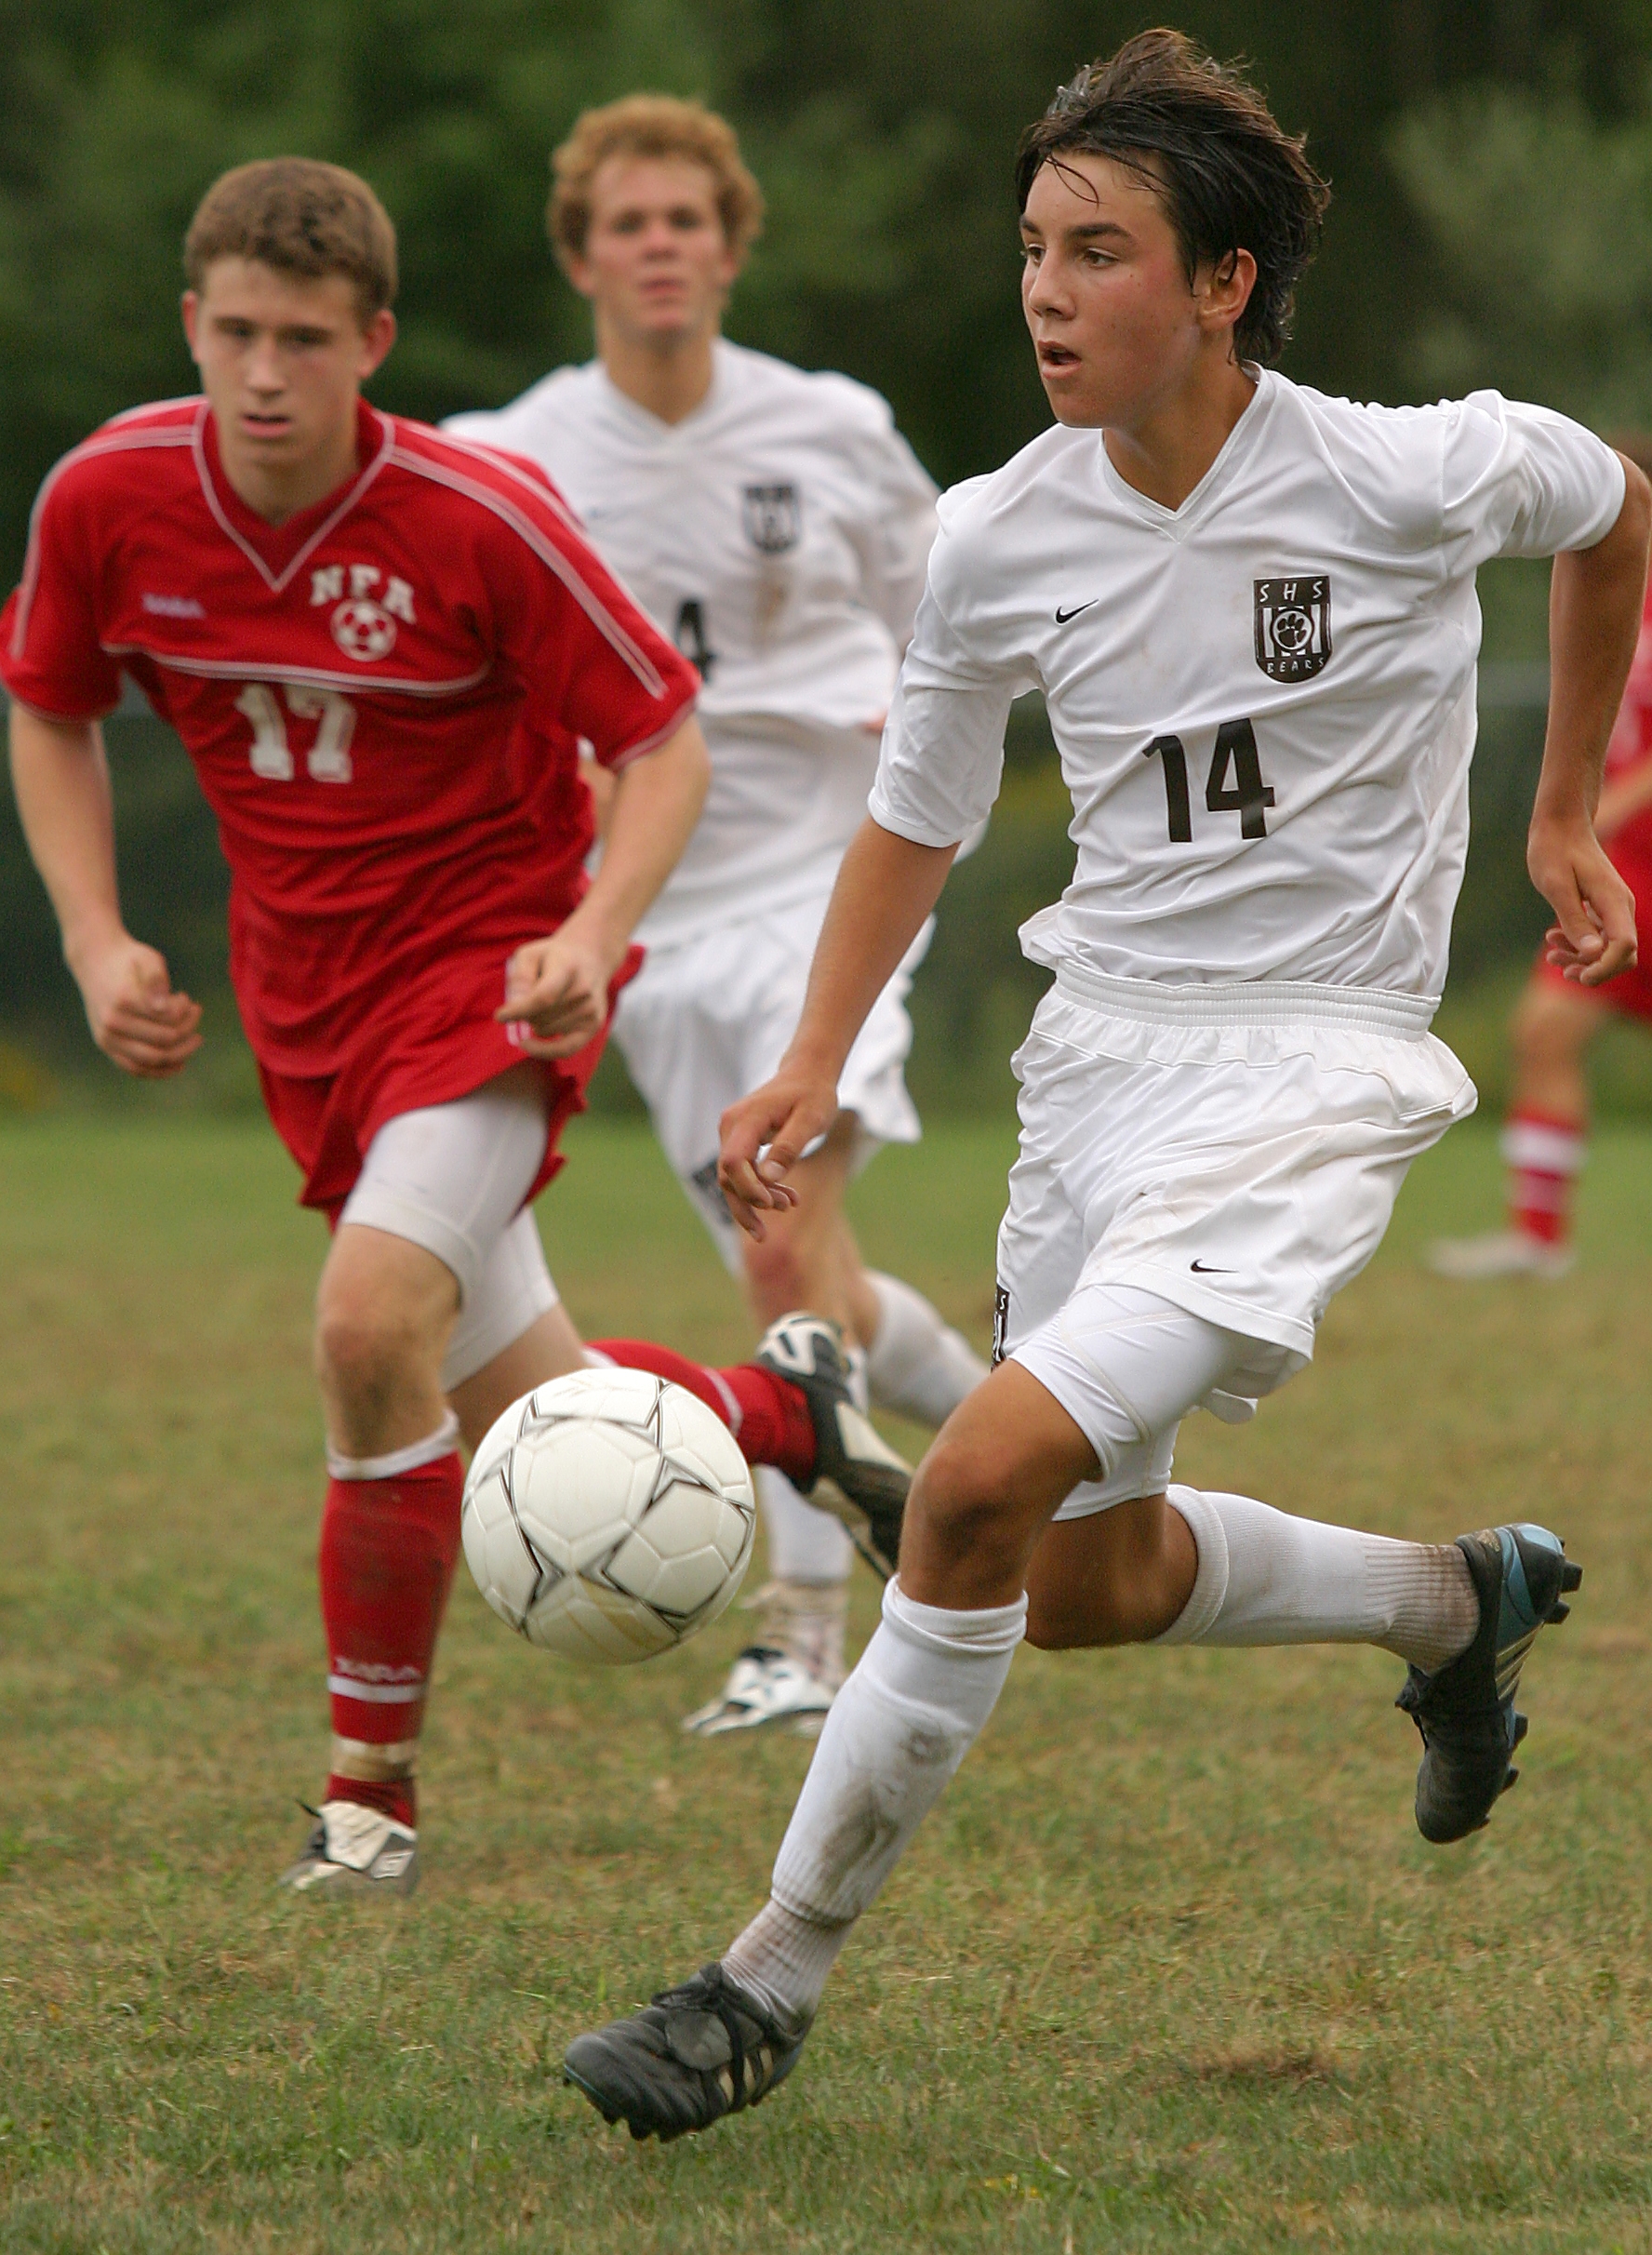 High school boys are playing soccer in white and red uniforms.